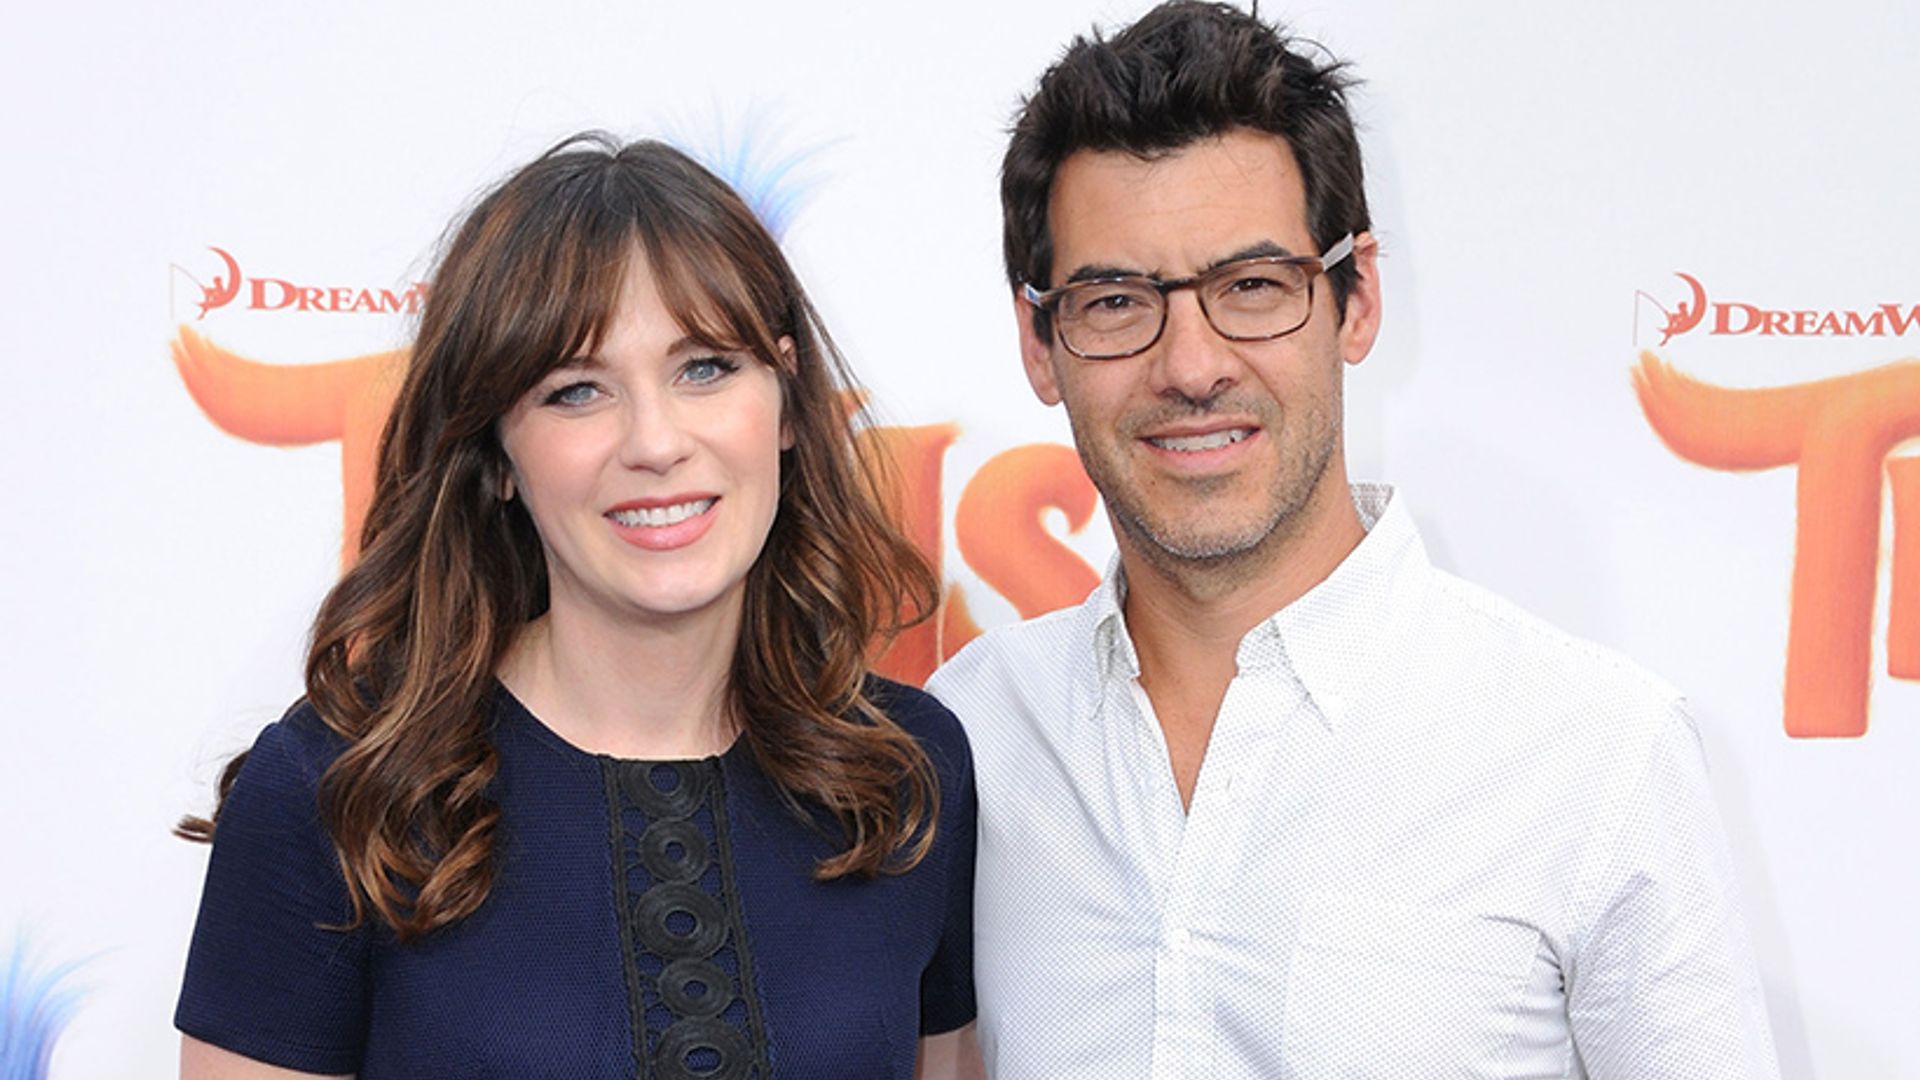 New Girl's Zooey Deschanel welcomes second child - see the animal-inspired name